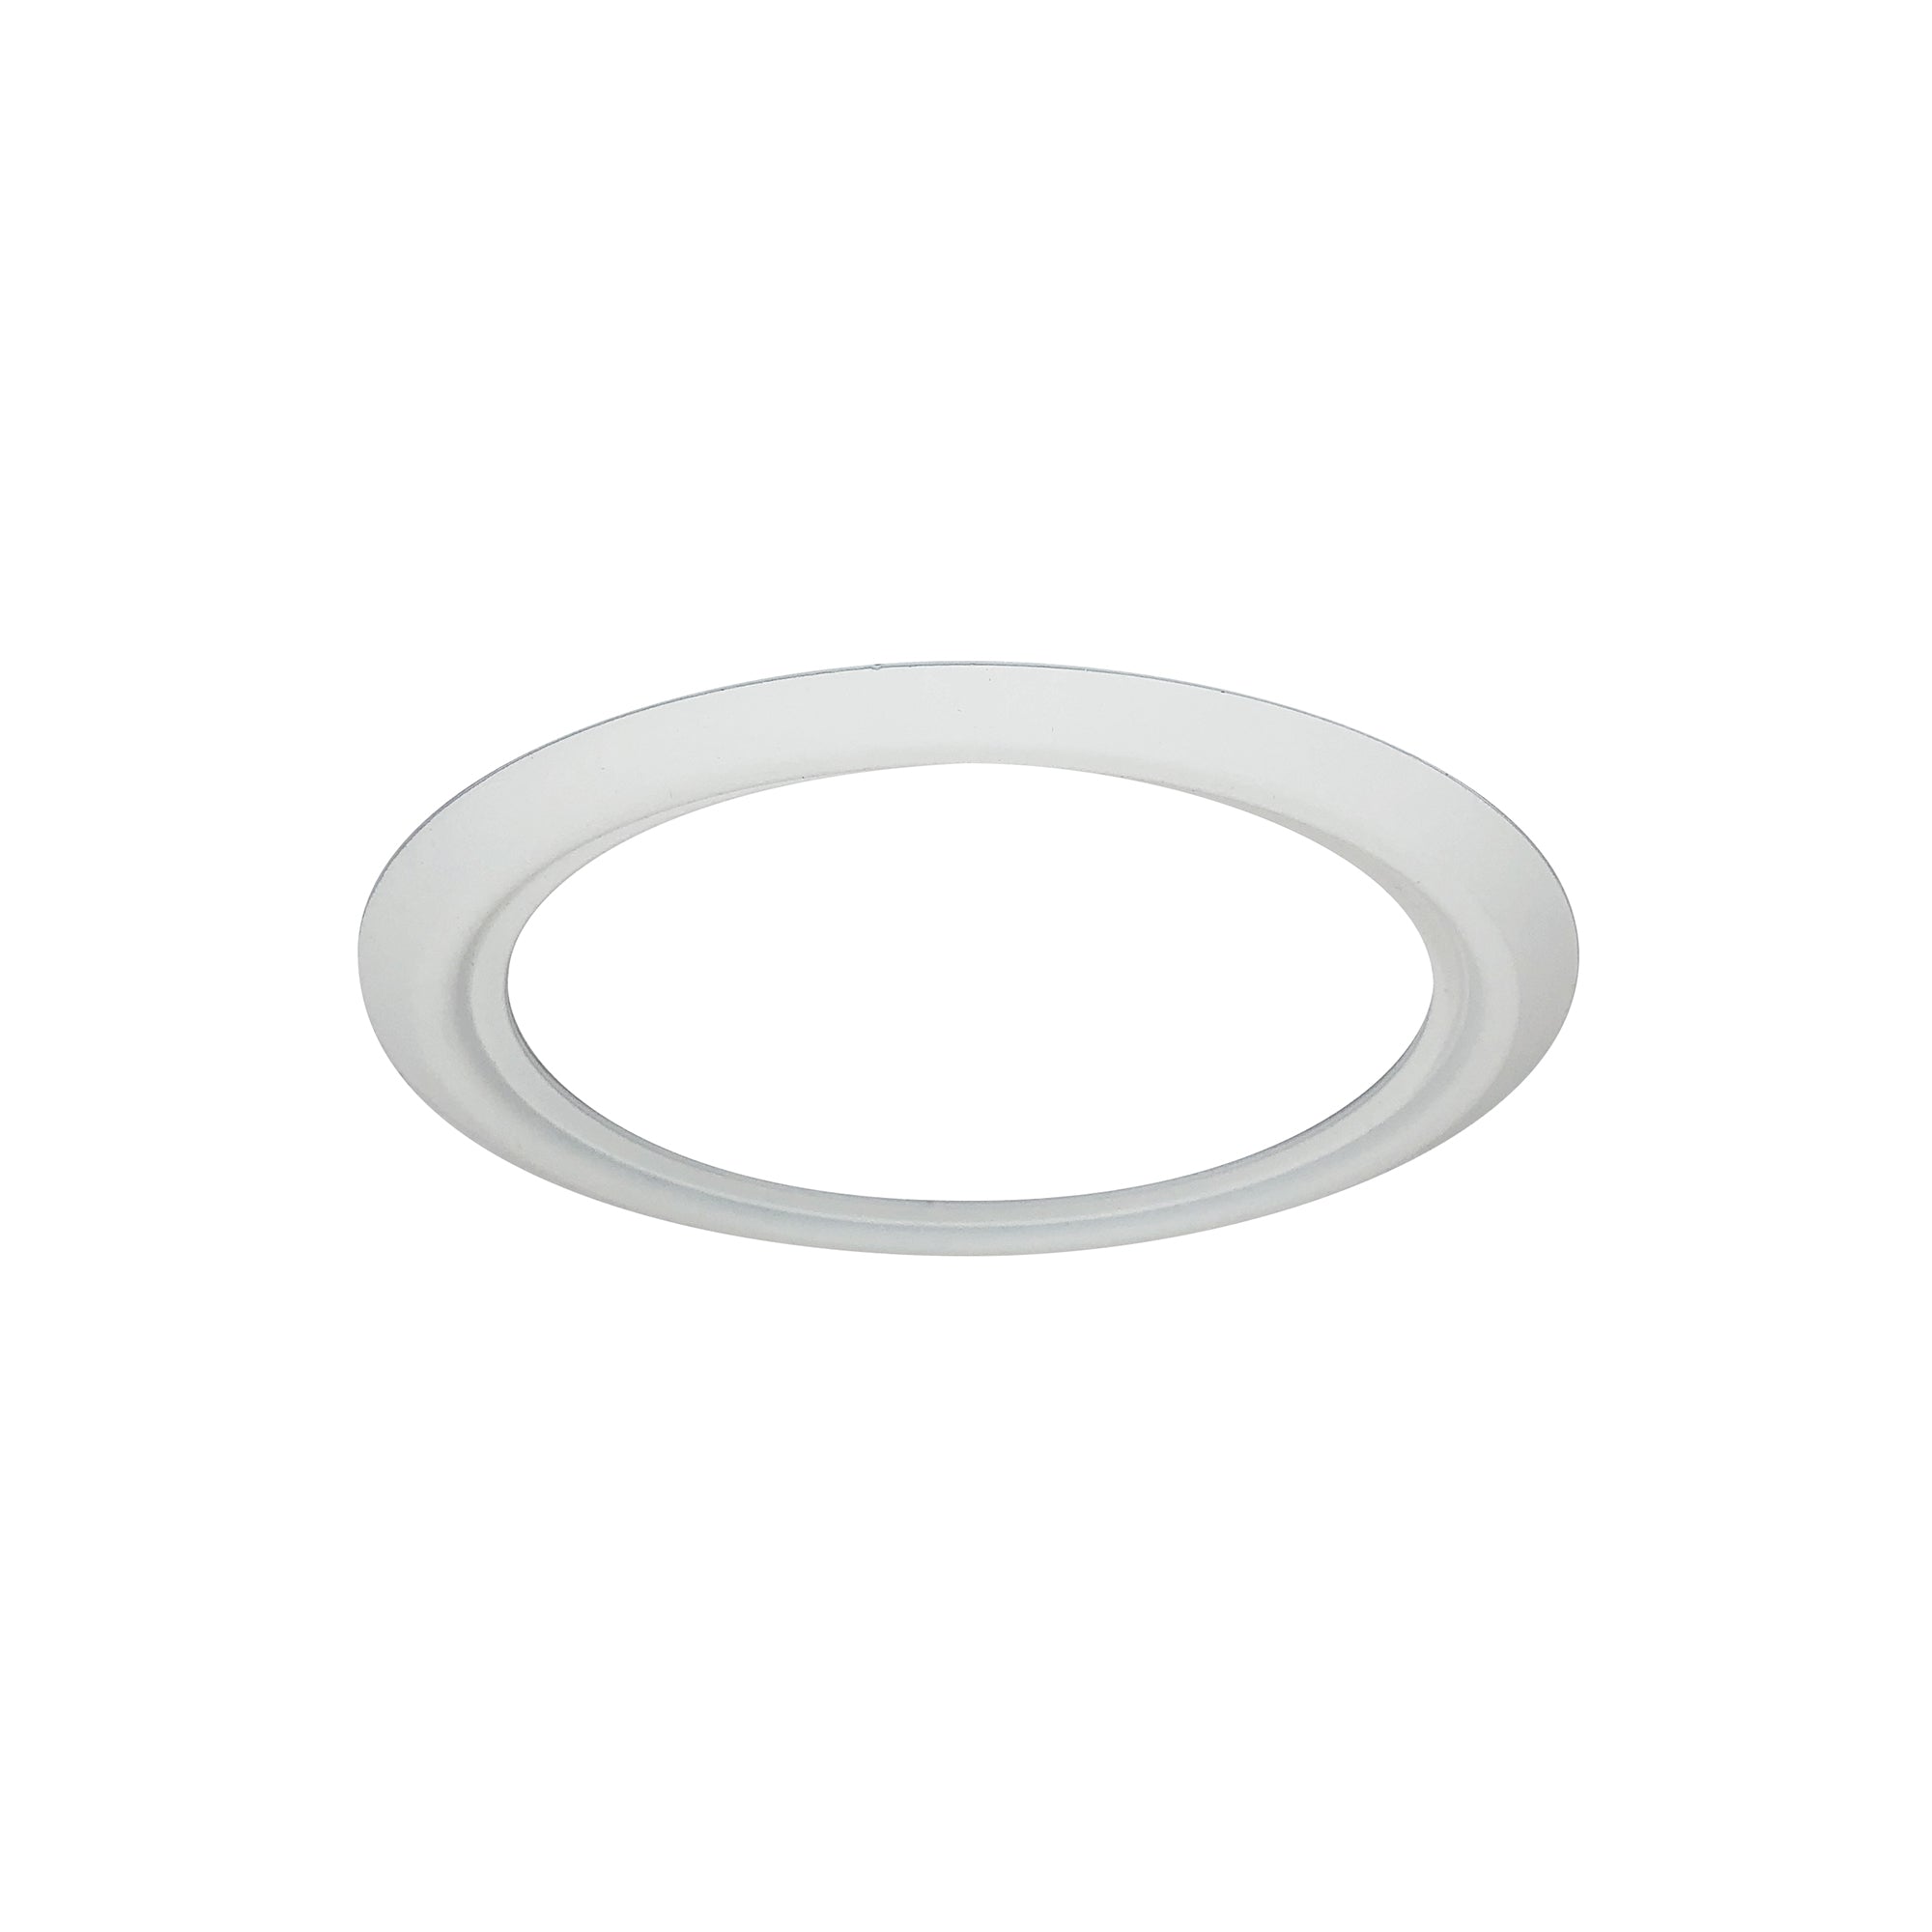 Nora Lighting LE49 - NOX-4OR-W - Recessed - White